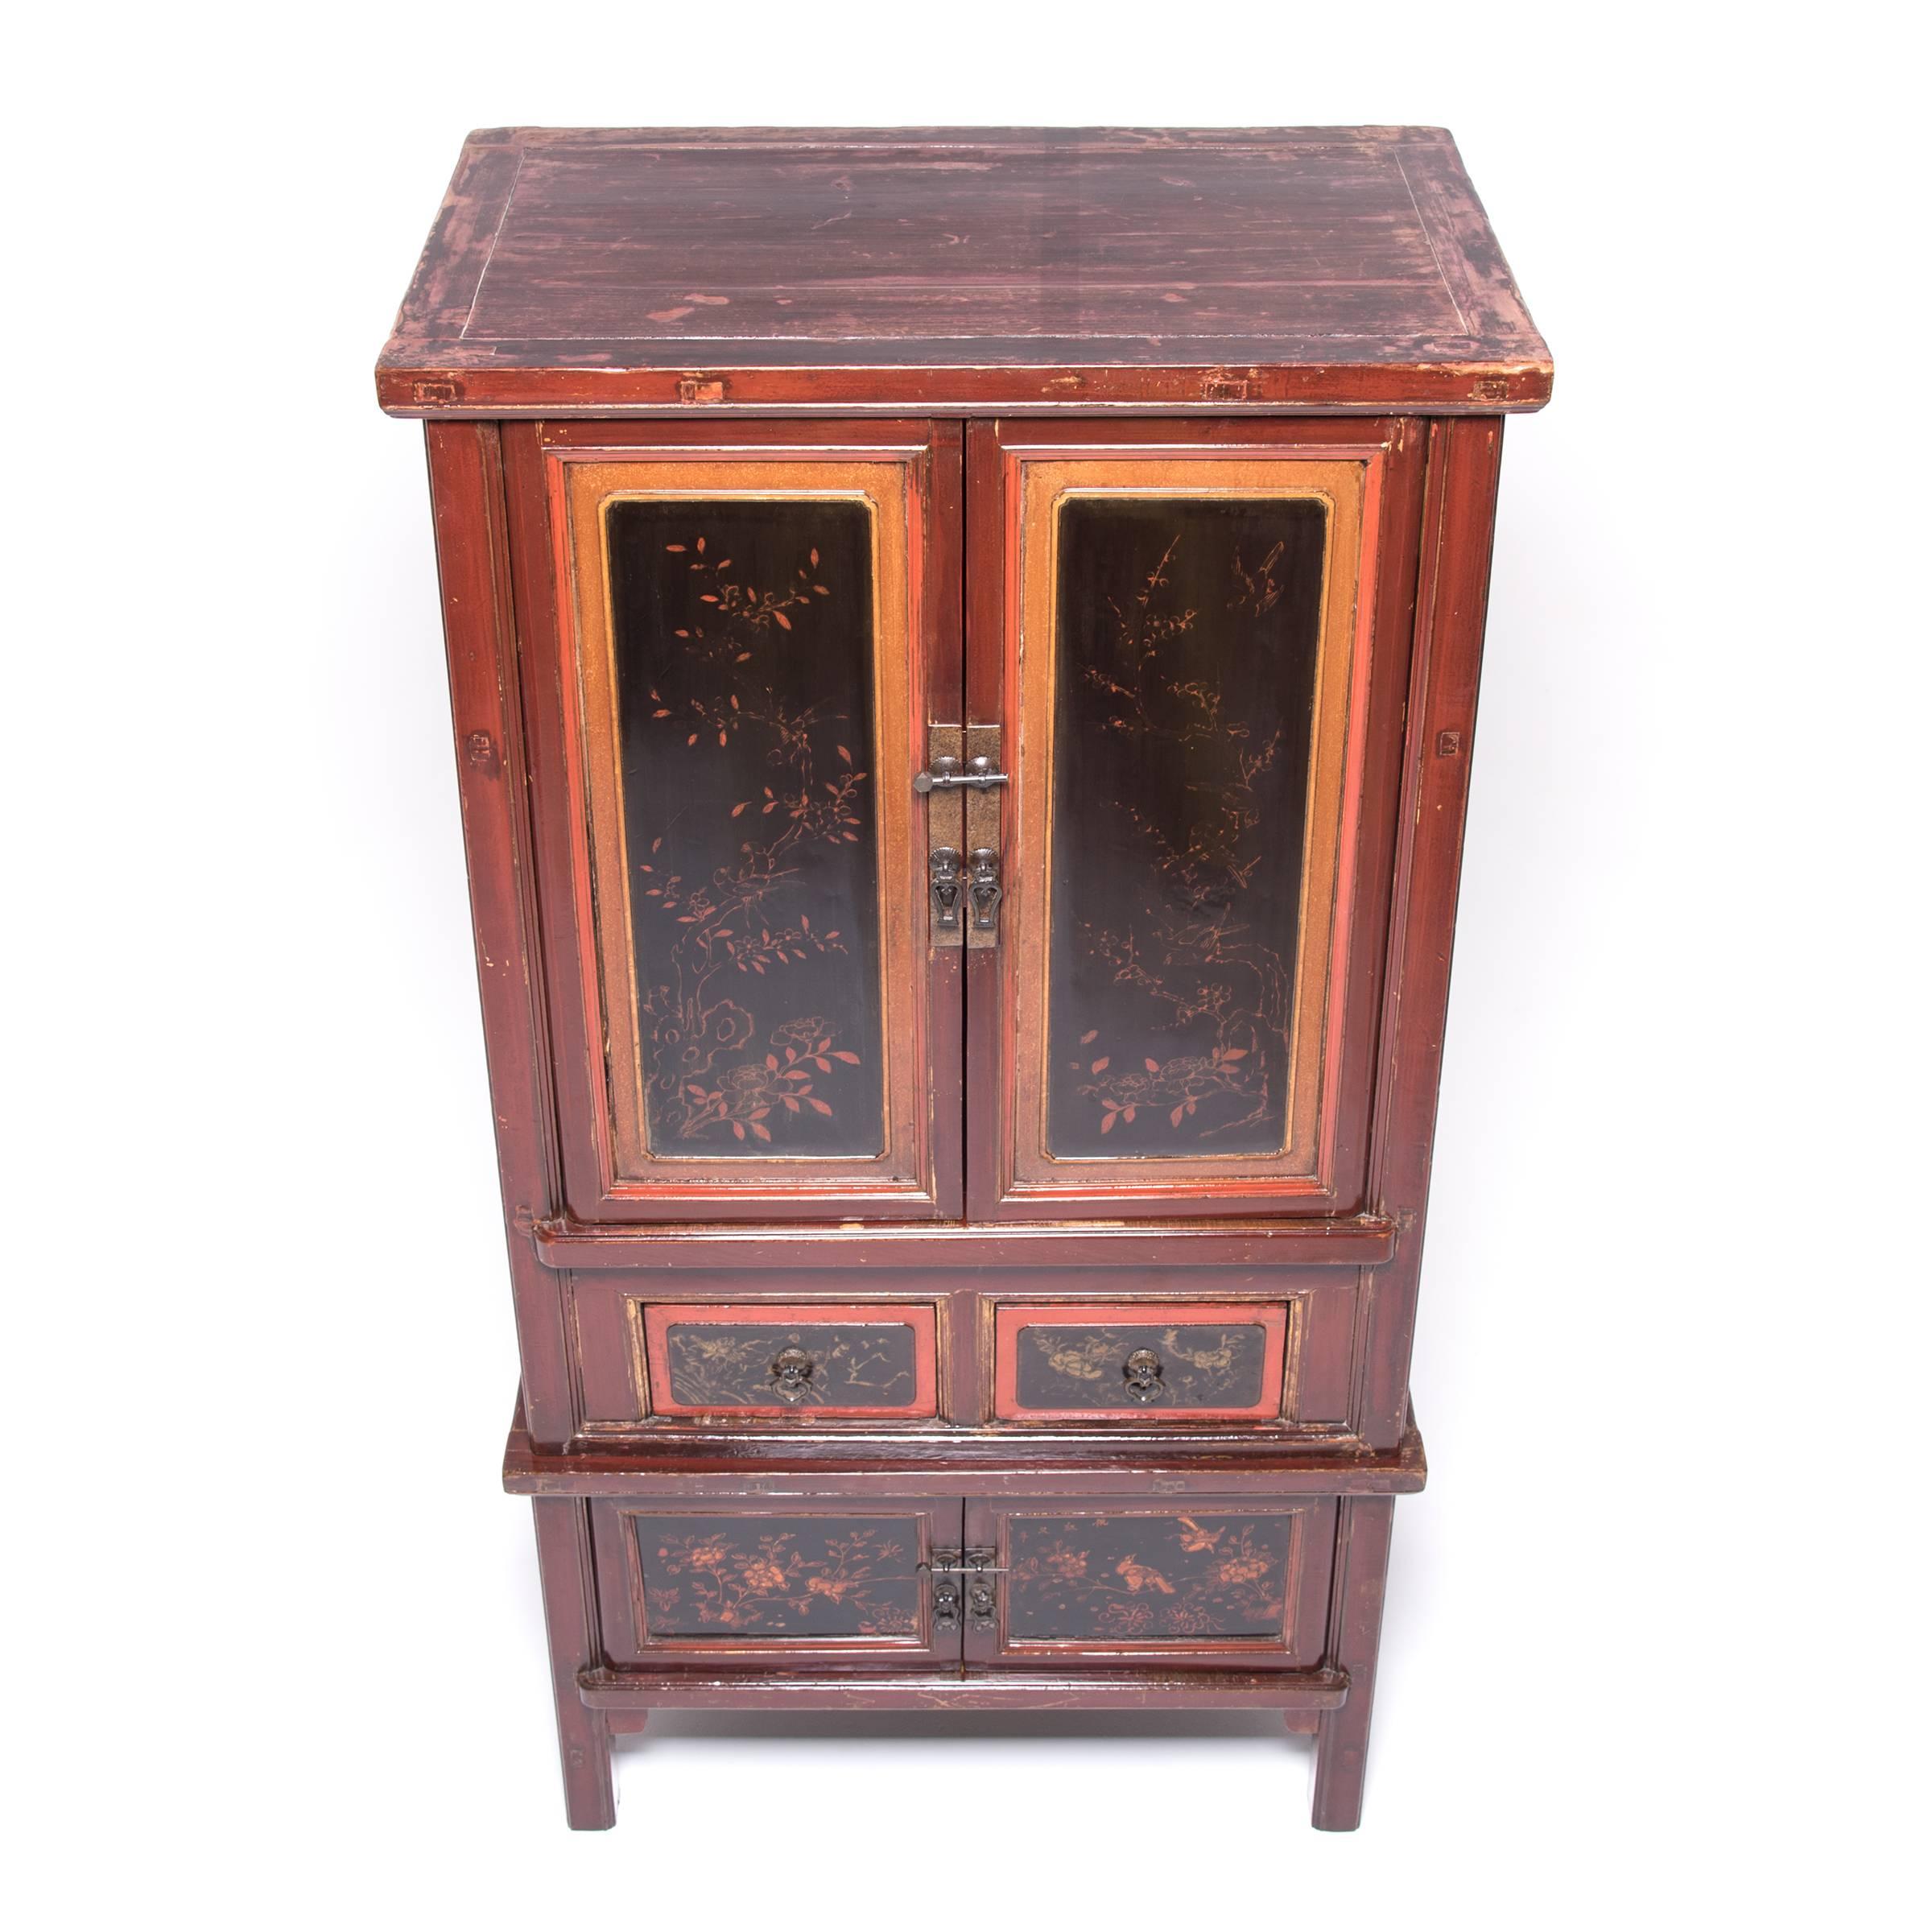 20th Century Chinese Gilt Red Lacquer Cabinet, c. 1900